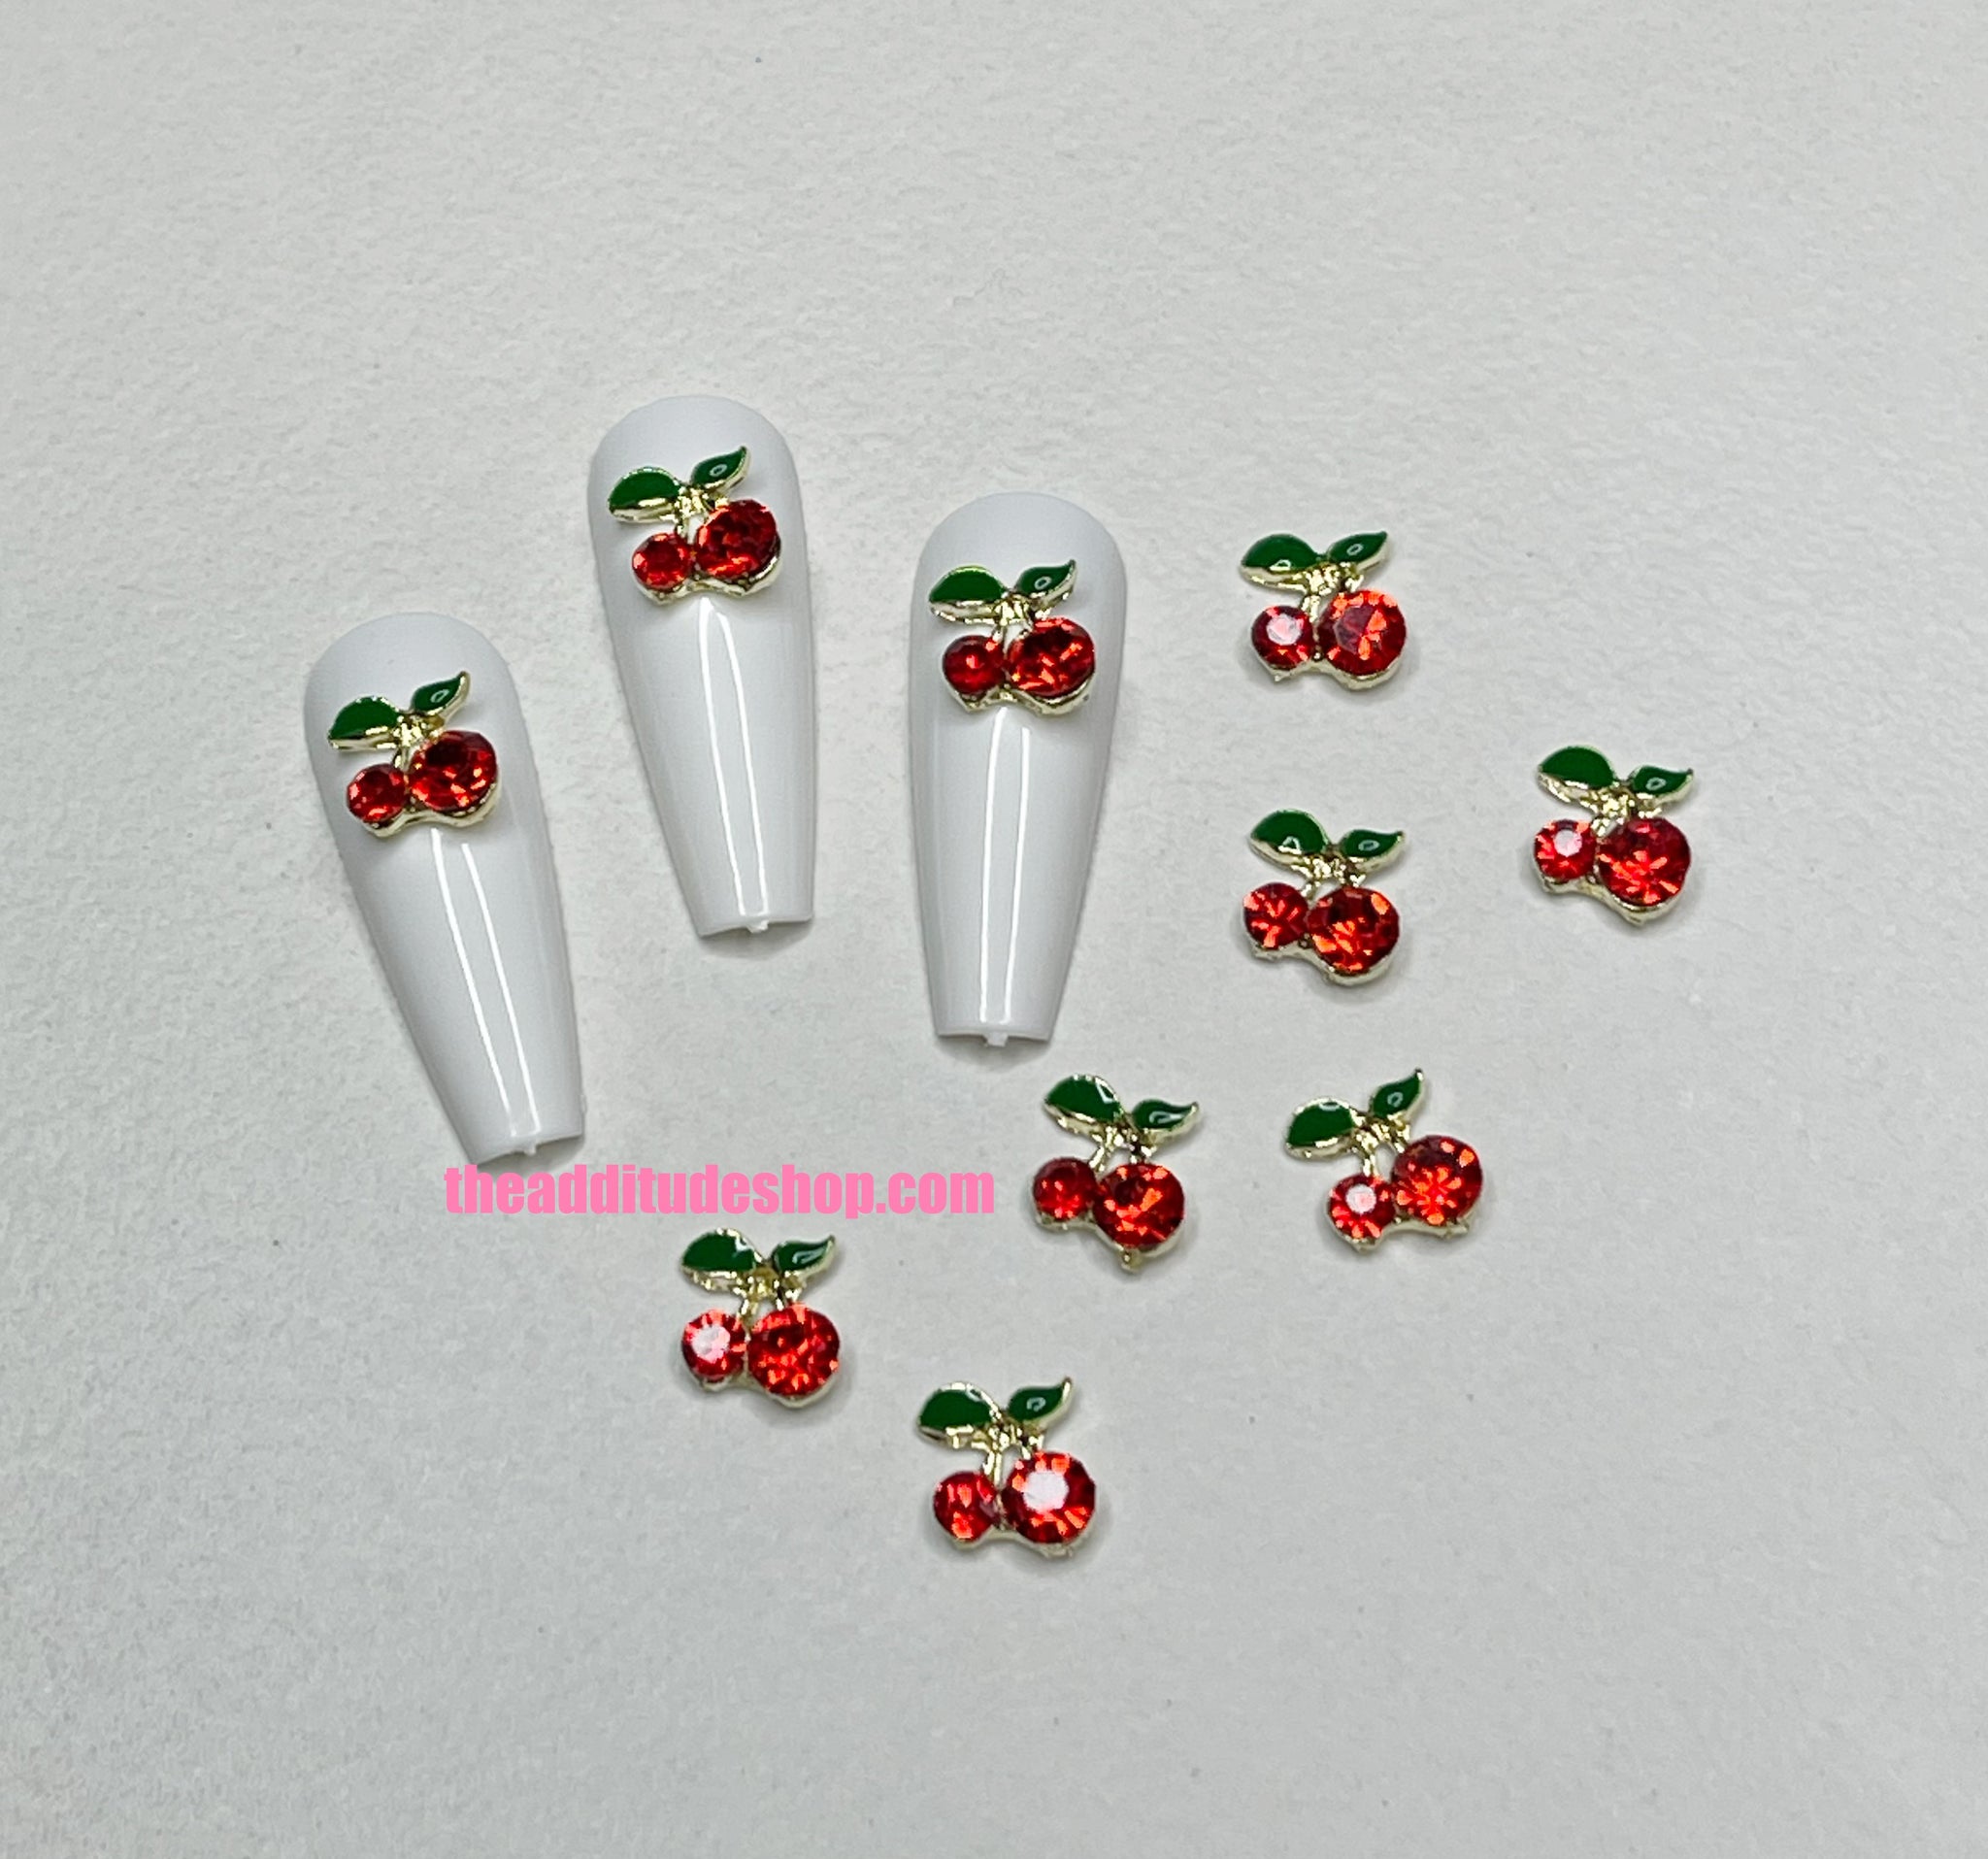 Crystal Red-Pink Cherry Nail 3D Charms-10 Pieces – The Additude Shop